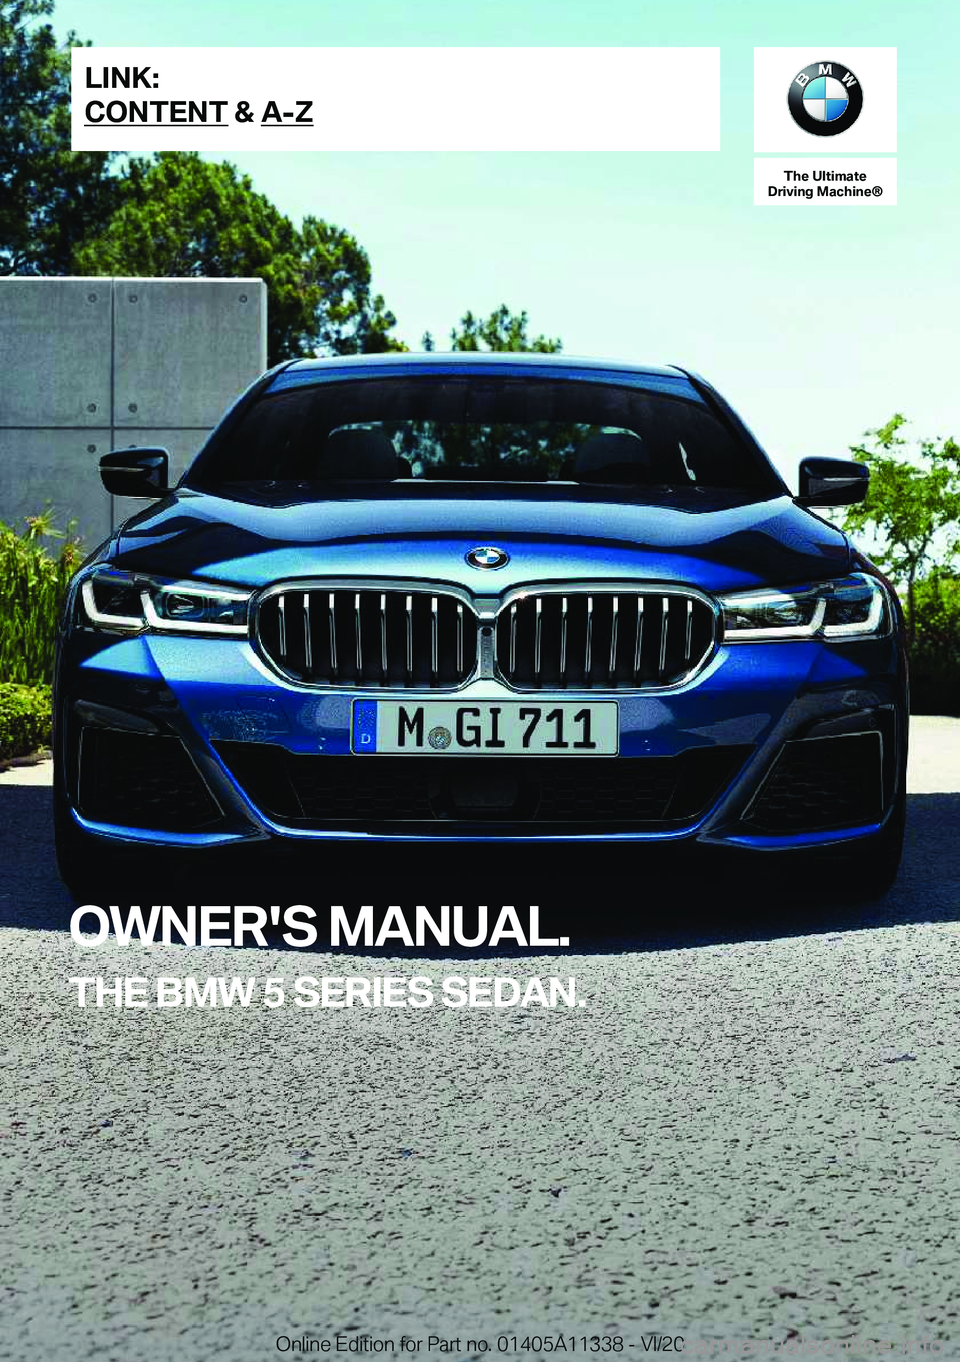 BMW 5 SERIES 2021  Owners Manual �T�h�e��U�l�t�i�m�a�t�e
�D�r�i�v�i�n�g��M�a�c�h�i�n�e�n
�O�W�N�E�R�'�S��M�A�N�U�A�L�.
�T�H�E��B�M�W��5��S�E�R�I�E�S��S�E�D�A�N�.�L�I�N�K�:
�C�O�N�T�E�N�T��&��A�-�Z�O�n�l�i�n�e��E�d�i�t�i